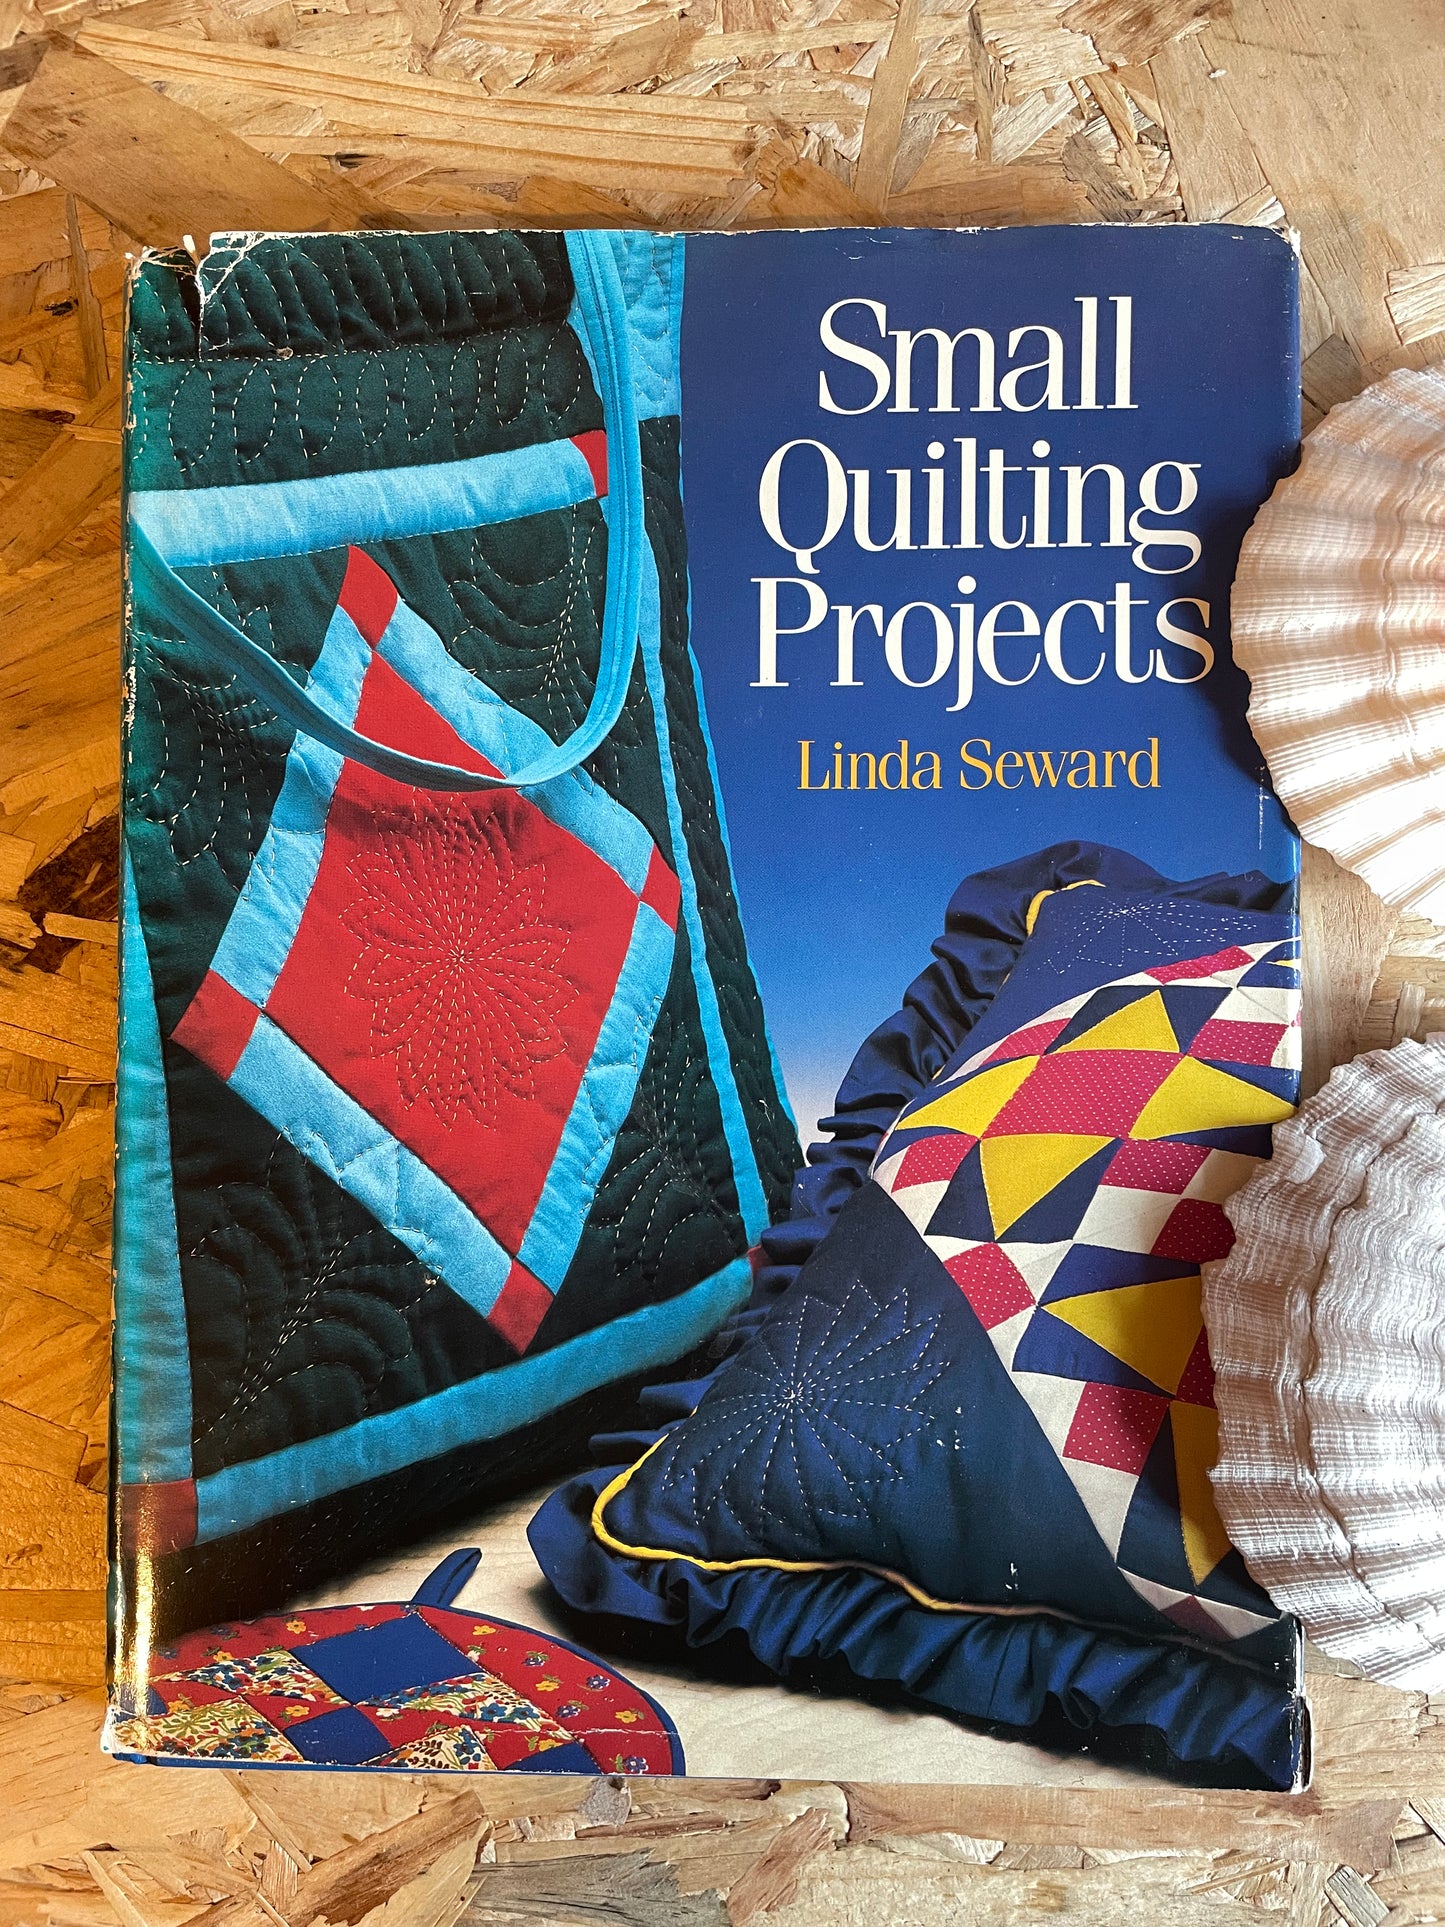 Small Quilting Projects by Linda Seward 1980s Book